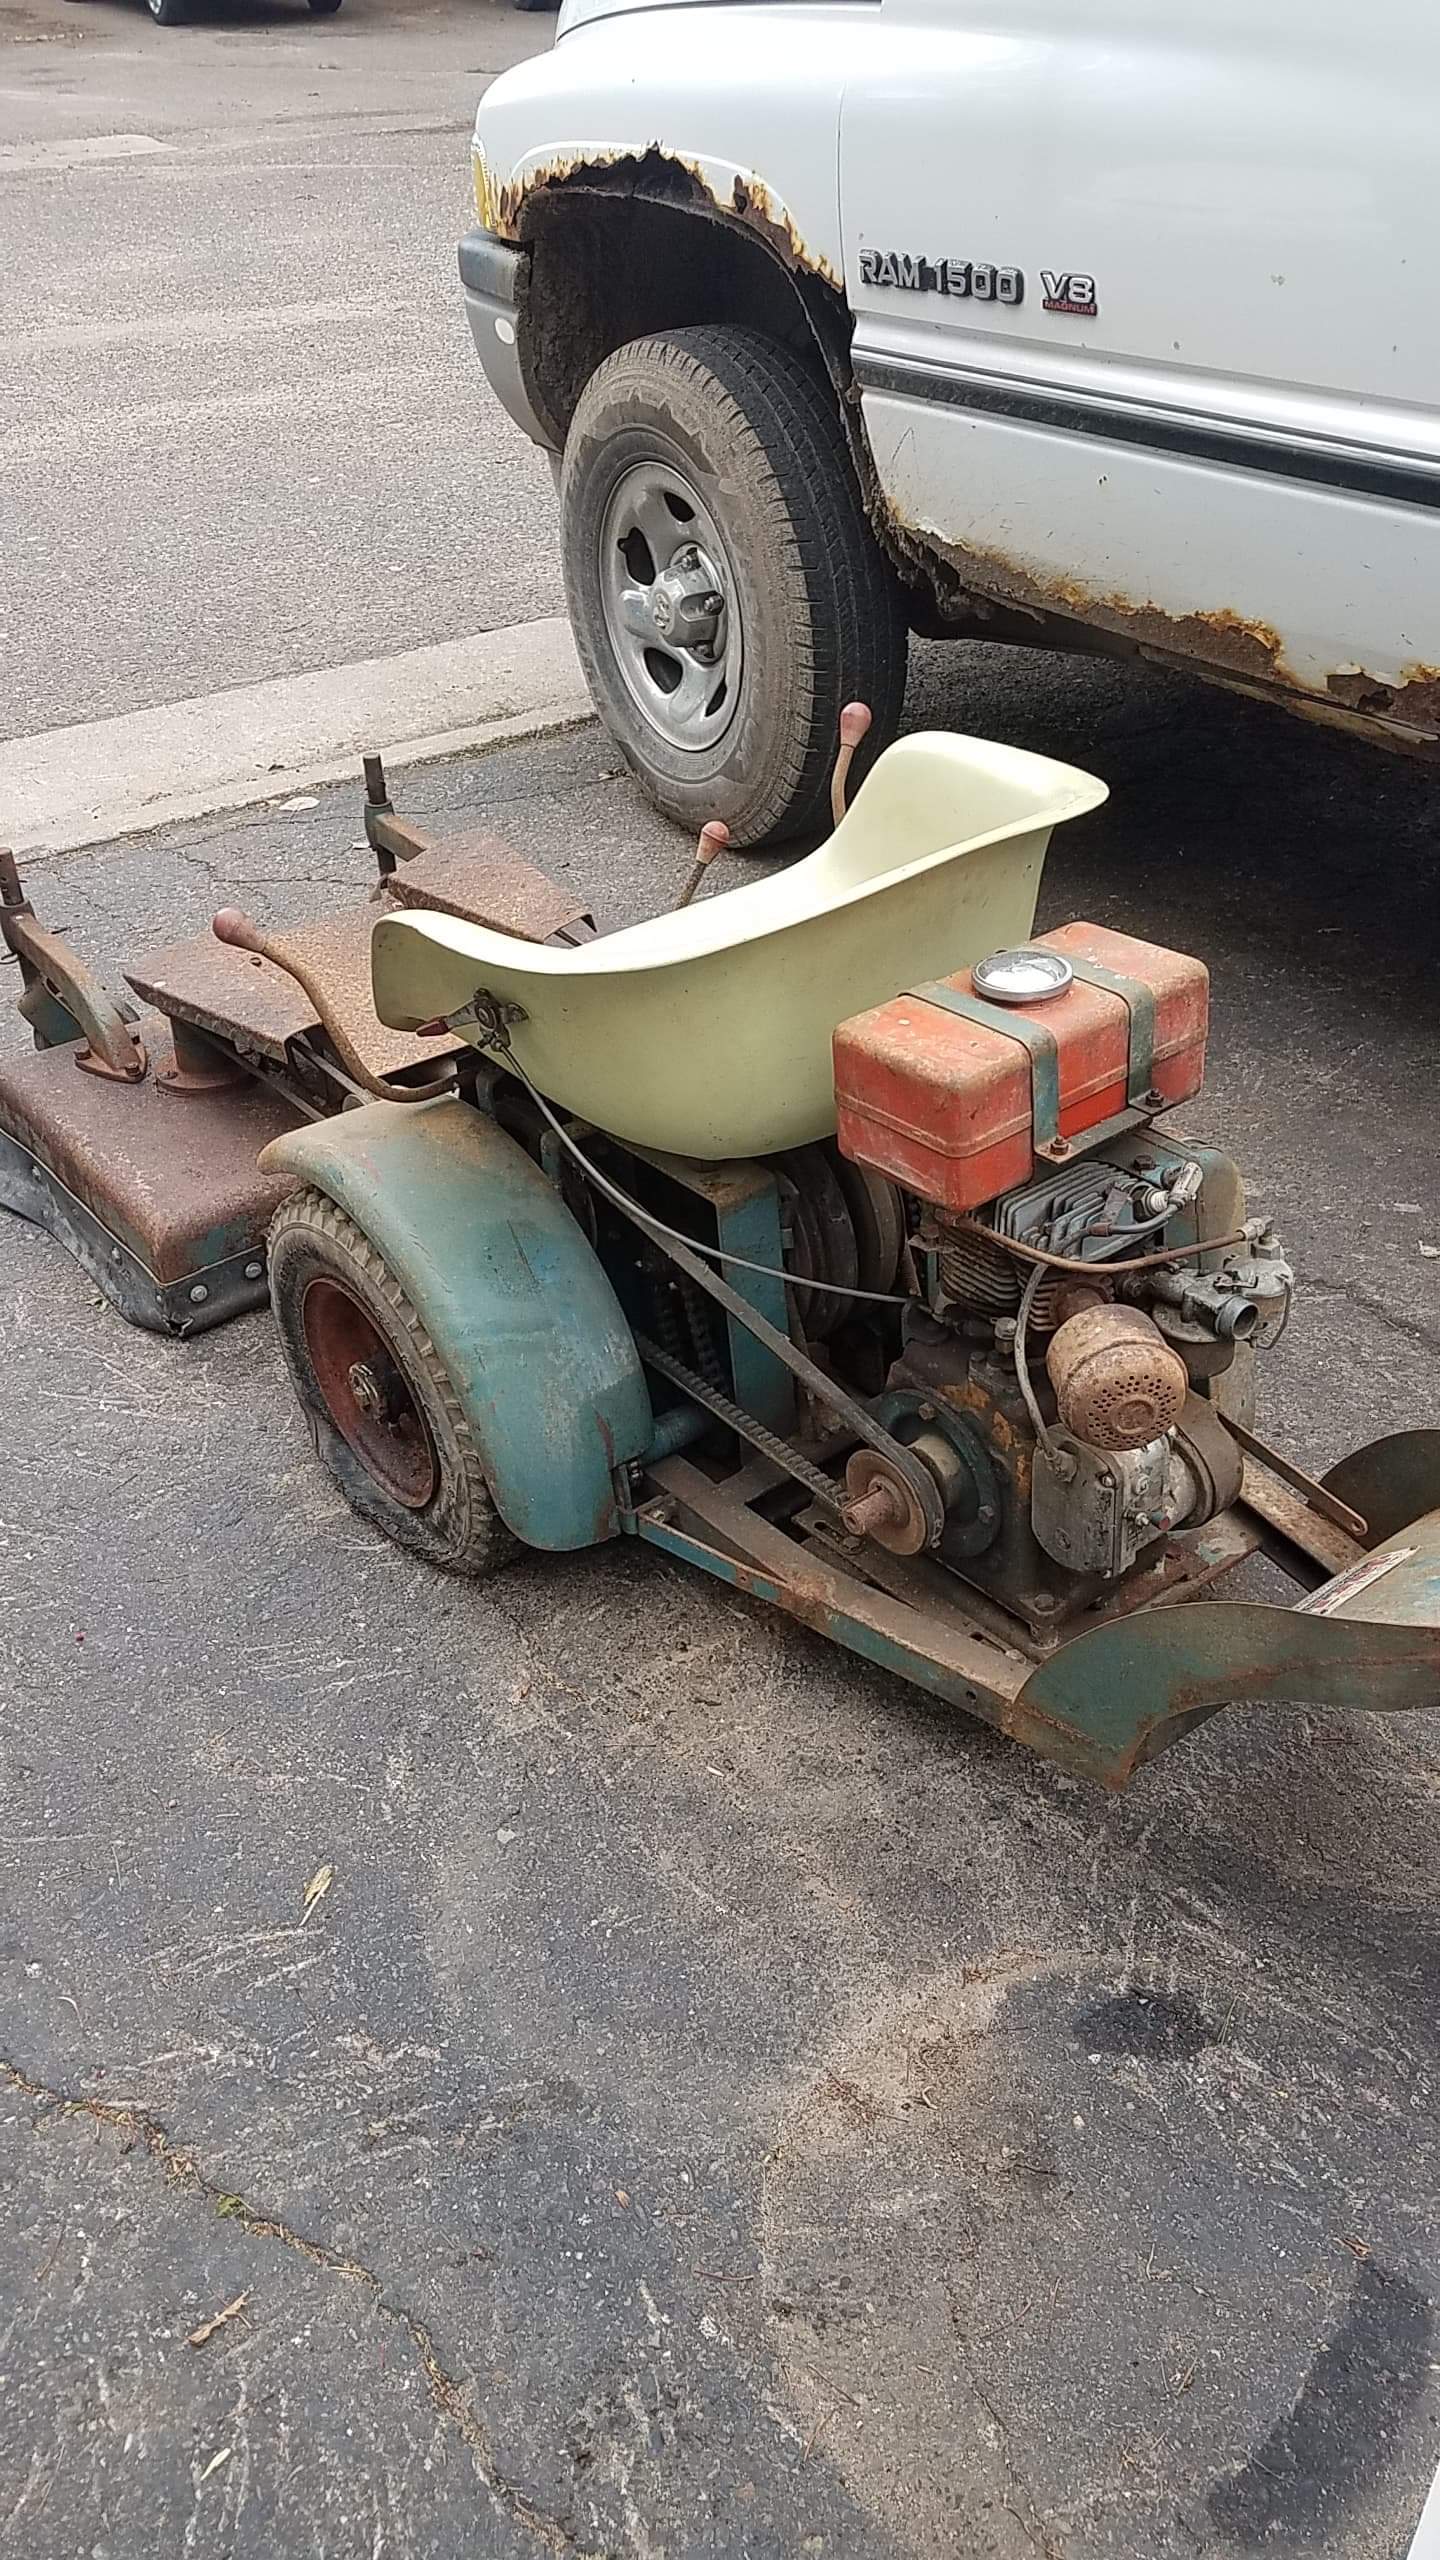 Springfield mower, looking for manuals, Model 61tm I think 